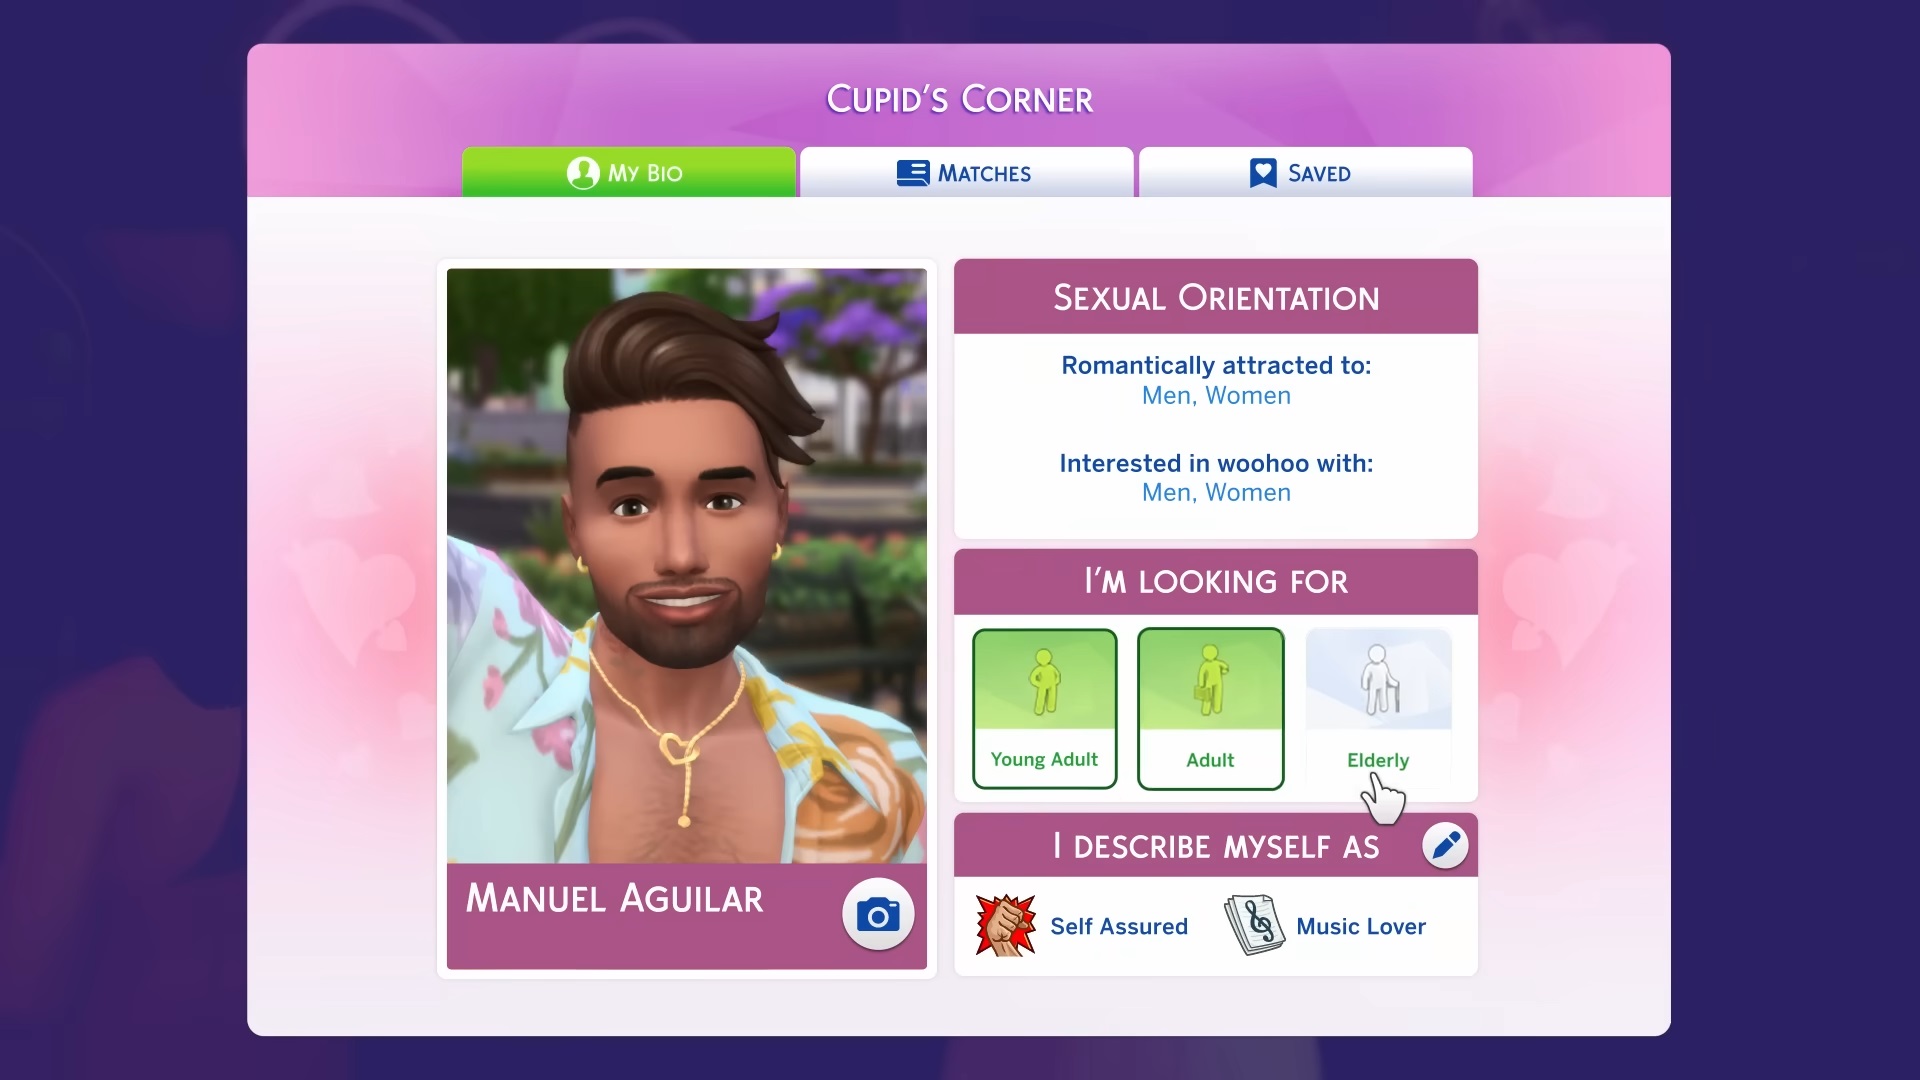 The Sims 4 lovestruck expansion - a Sim's Cupid's Corner dating app profile with a photo, sexual orientation, age ranges, and traits